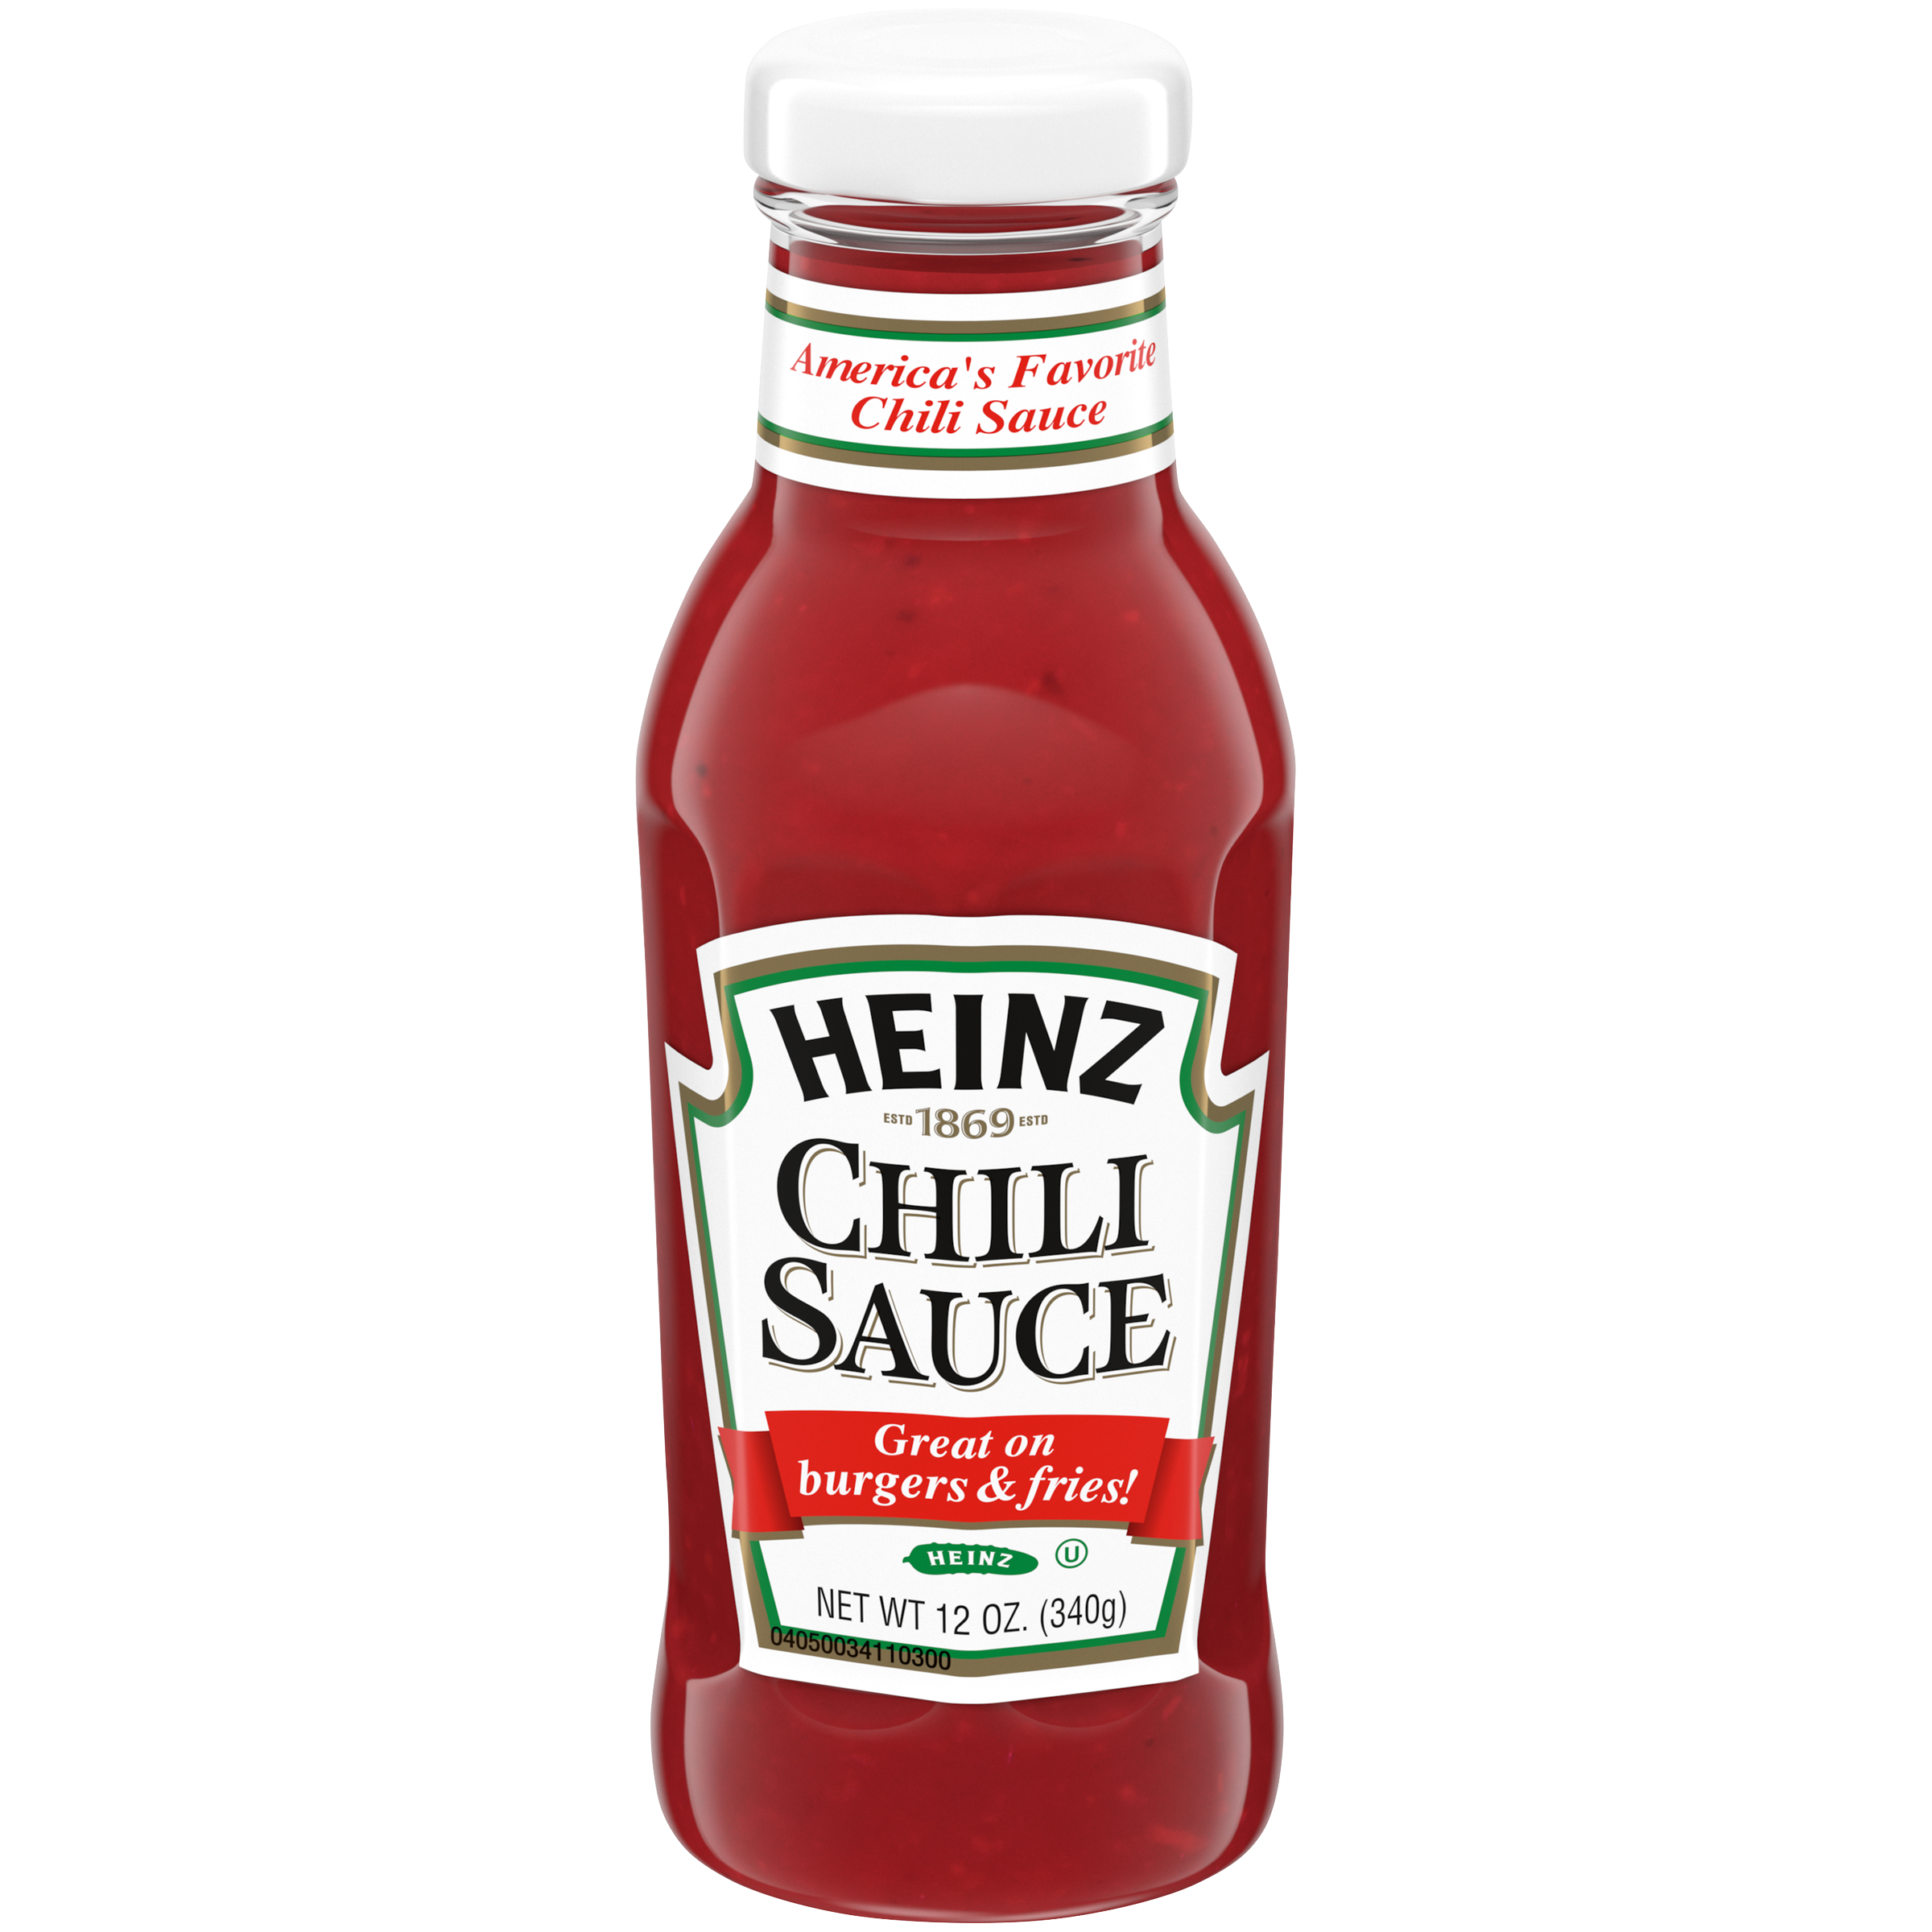 Heinz Chili Sauce: Tomato Ketchup with a Blend of Veggies